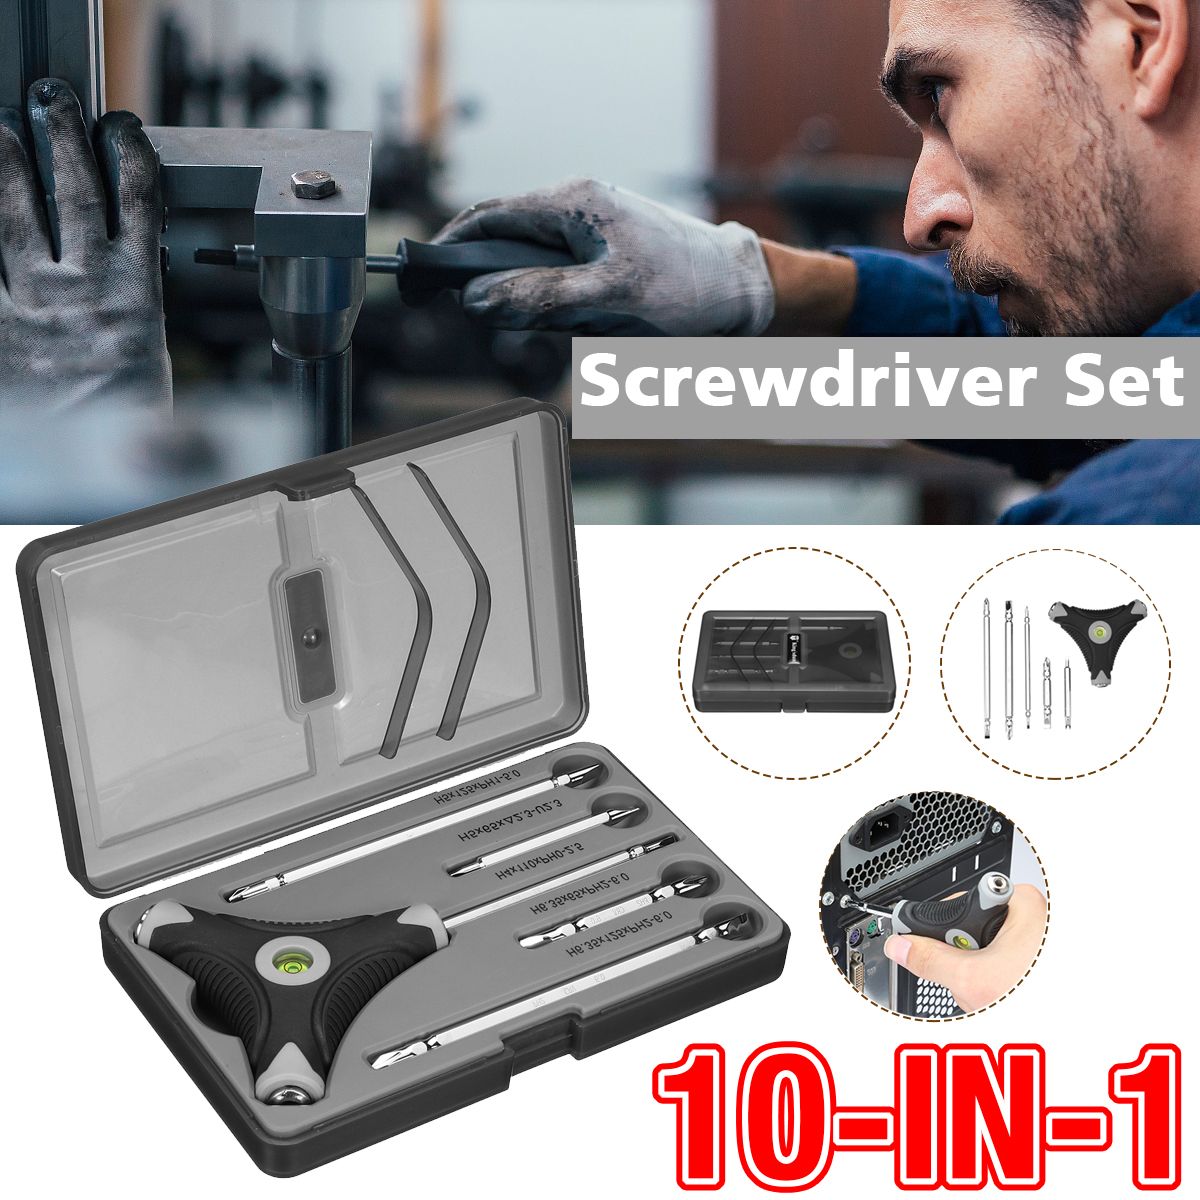 10-In-1-Household-Precision-Screwdriver-Set-With-Spirit-Level-Strength-Saving-Structure-Screw-Driver-1681086